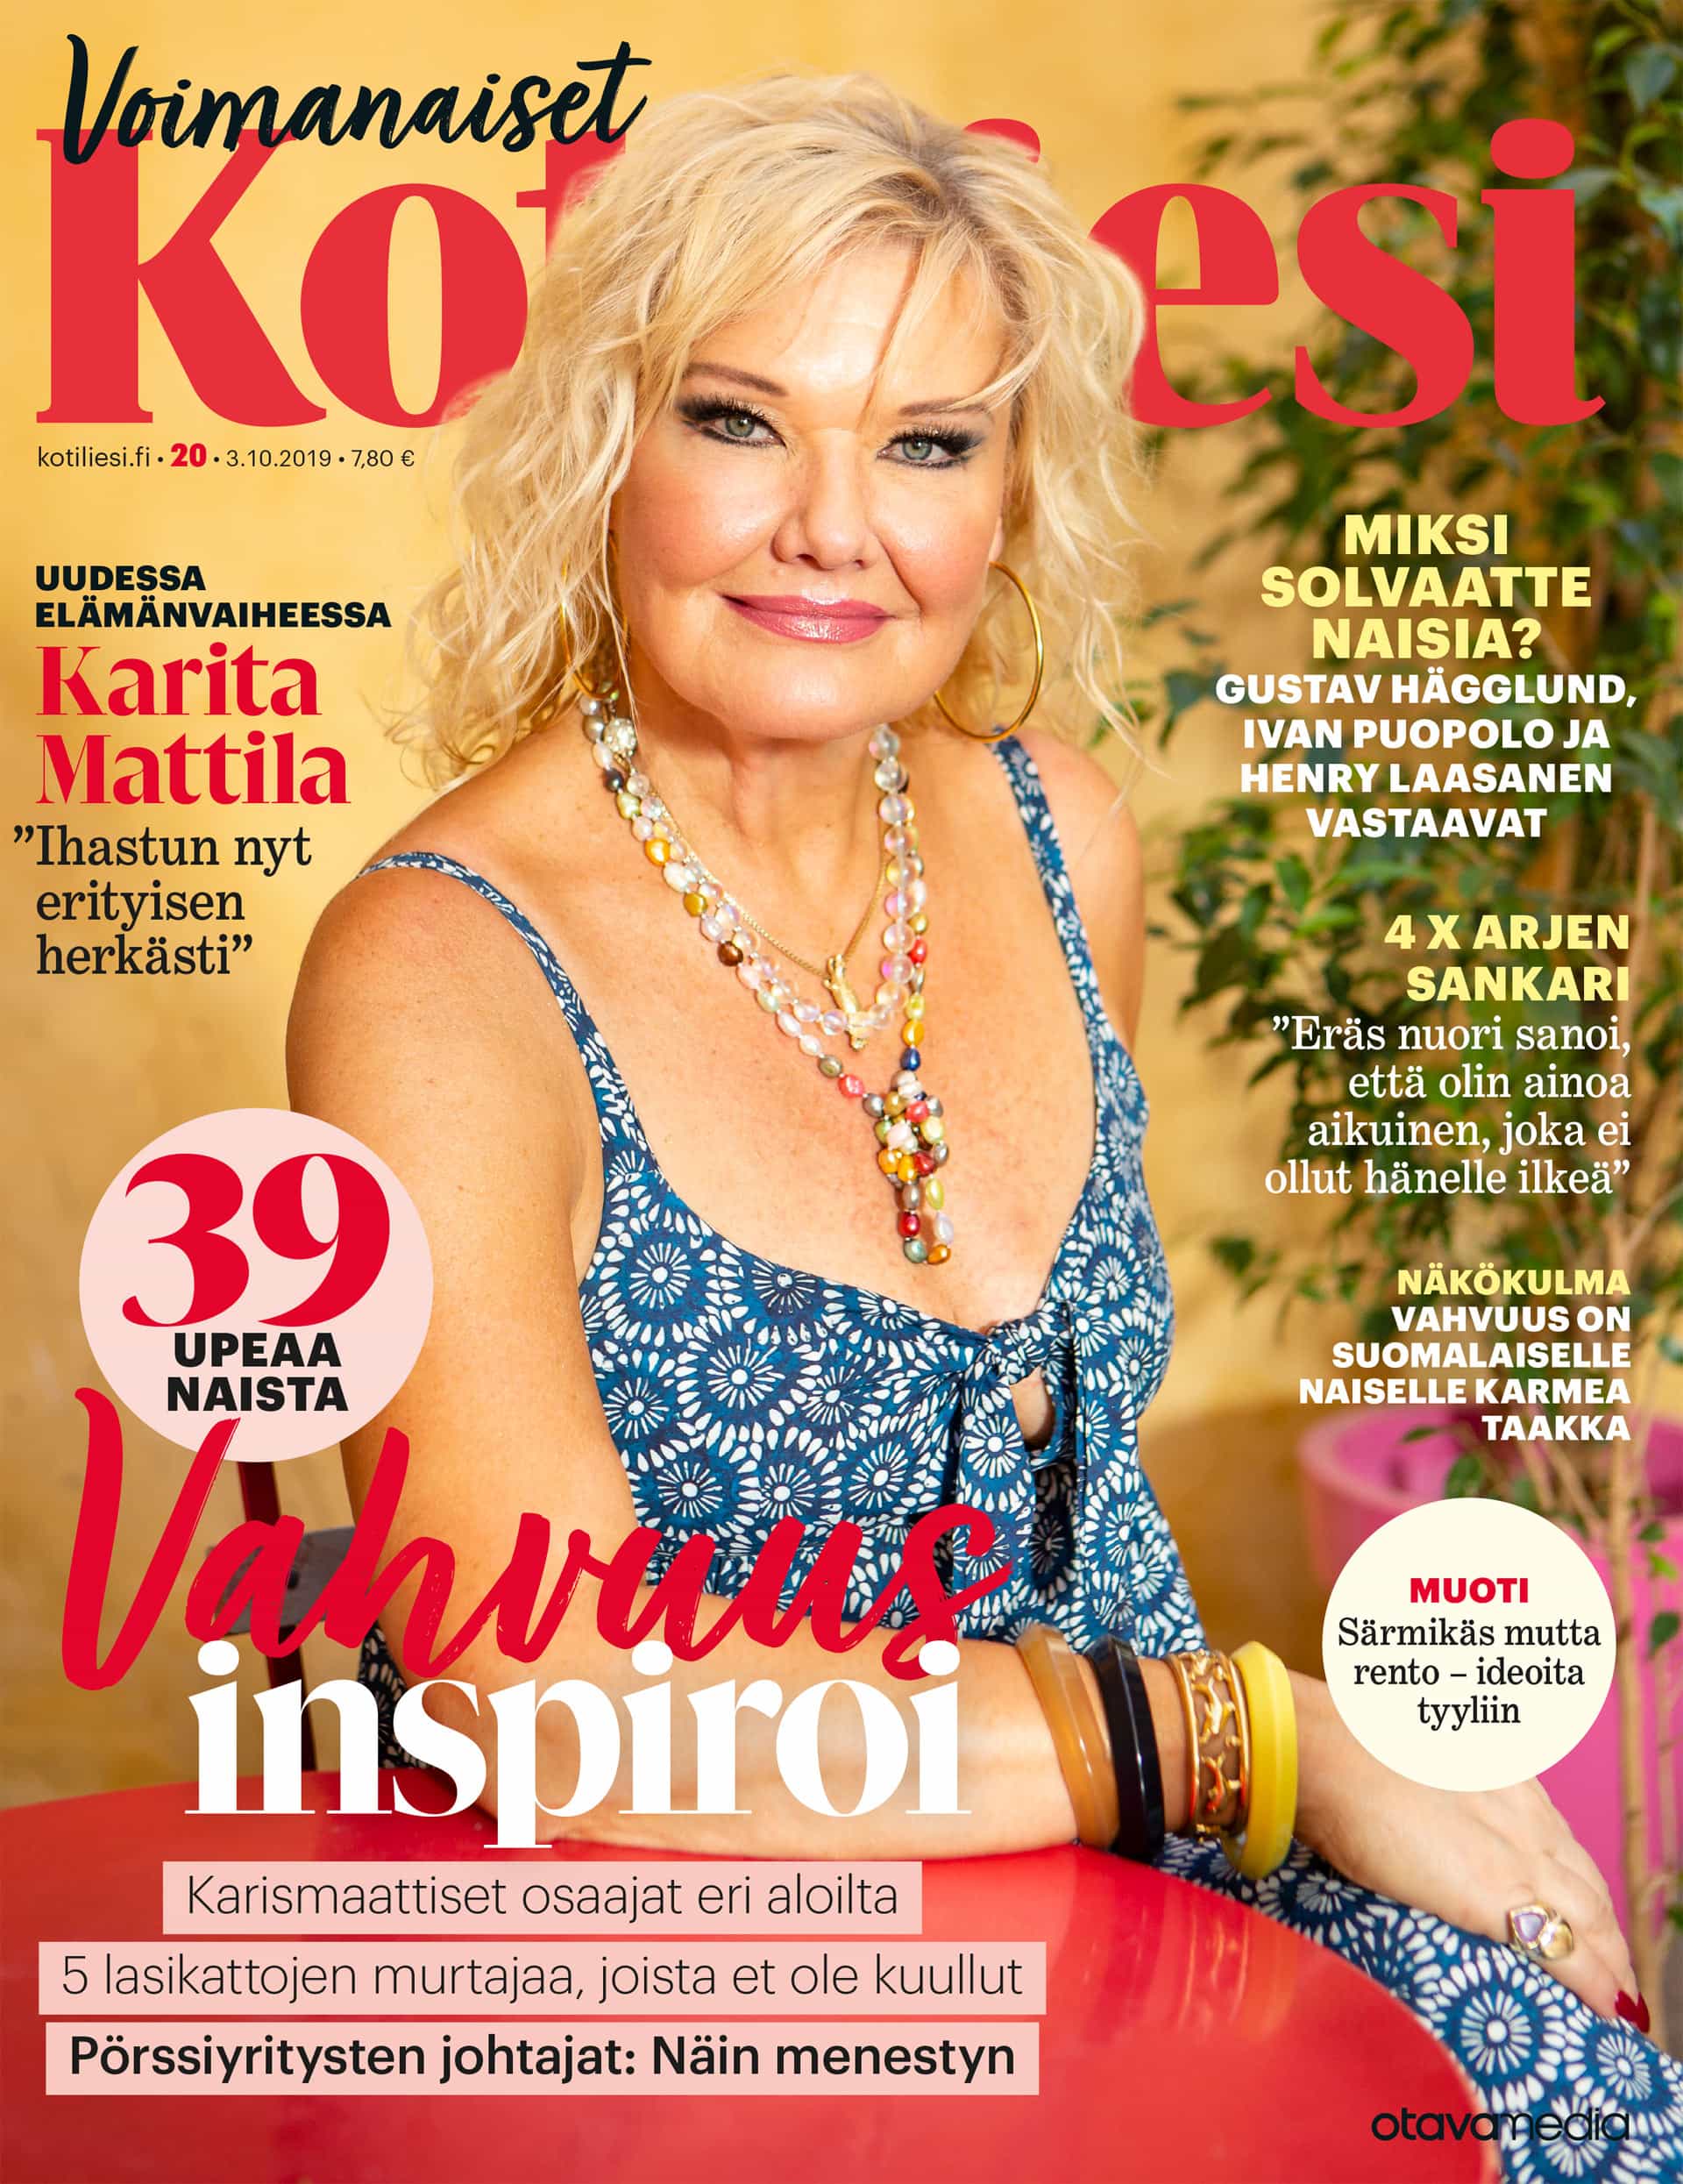 Magazine cover showing portrait of woman